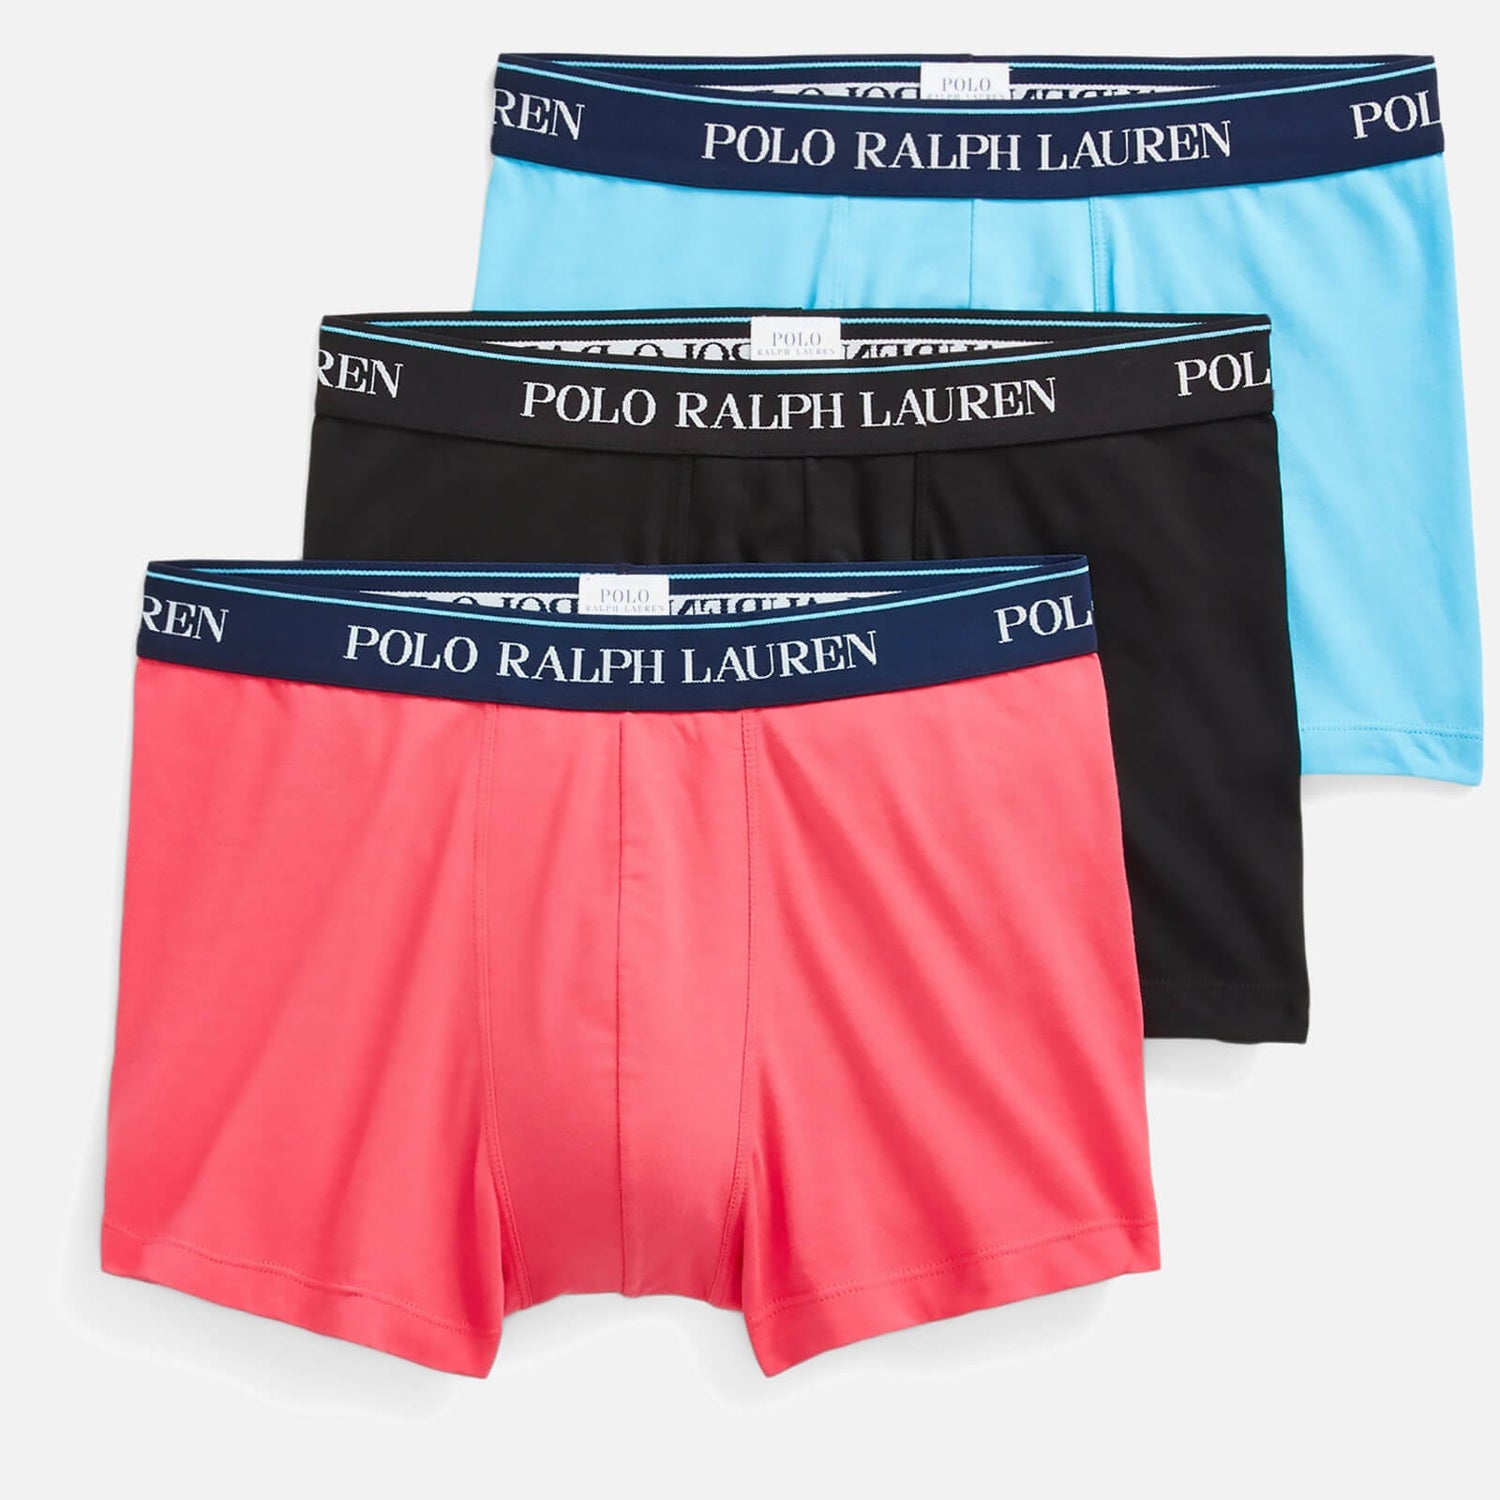 Polo Ralph Lauren Men's 3-Pack Classic Trunks - Heather Pink/Black/French Turquoise - S